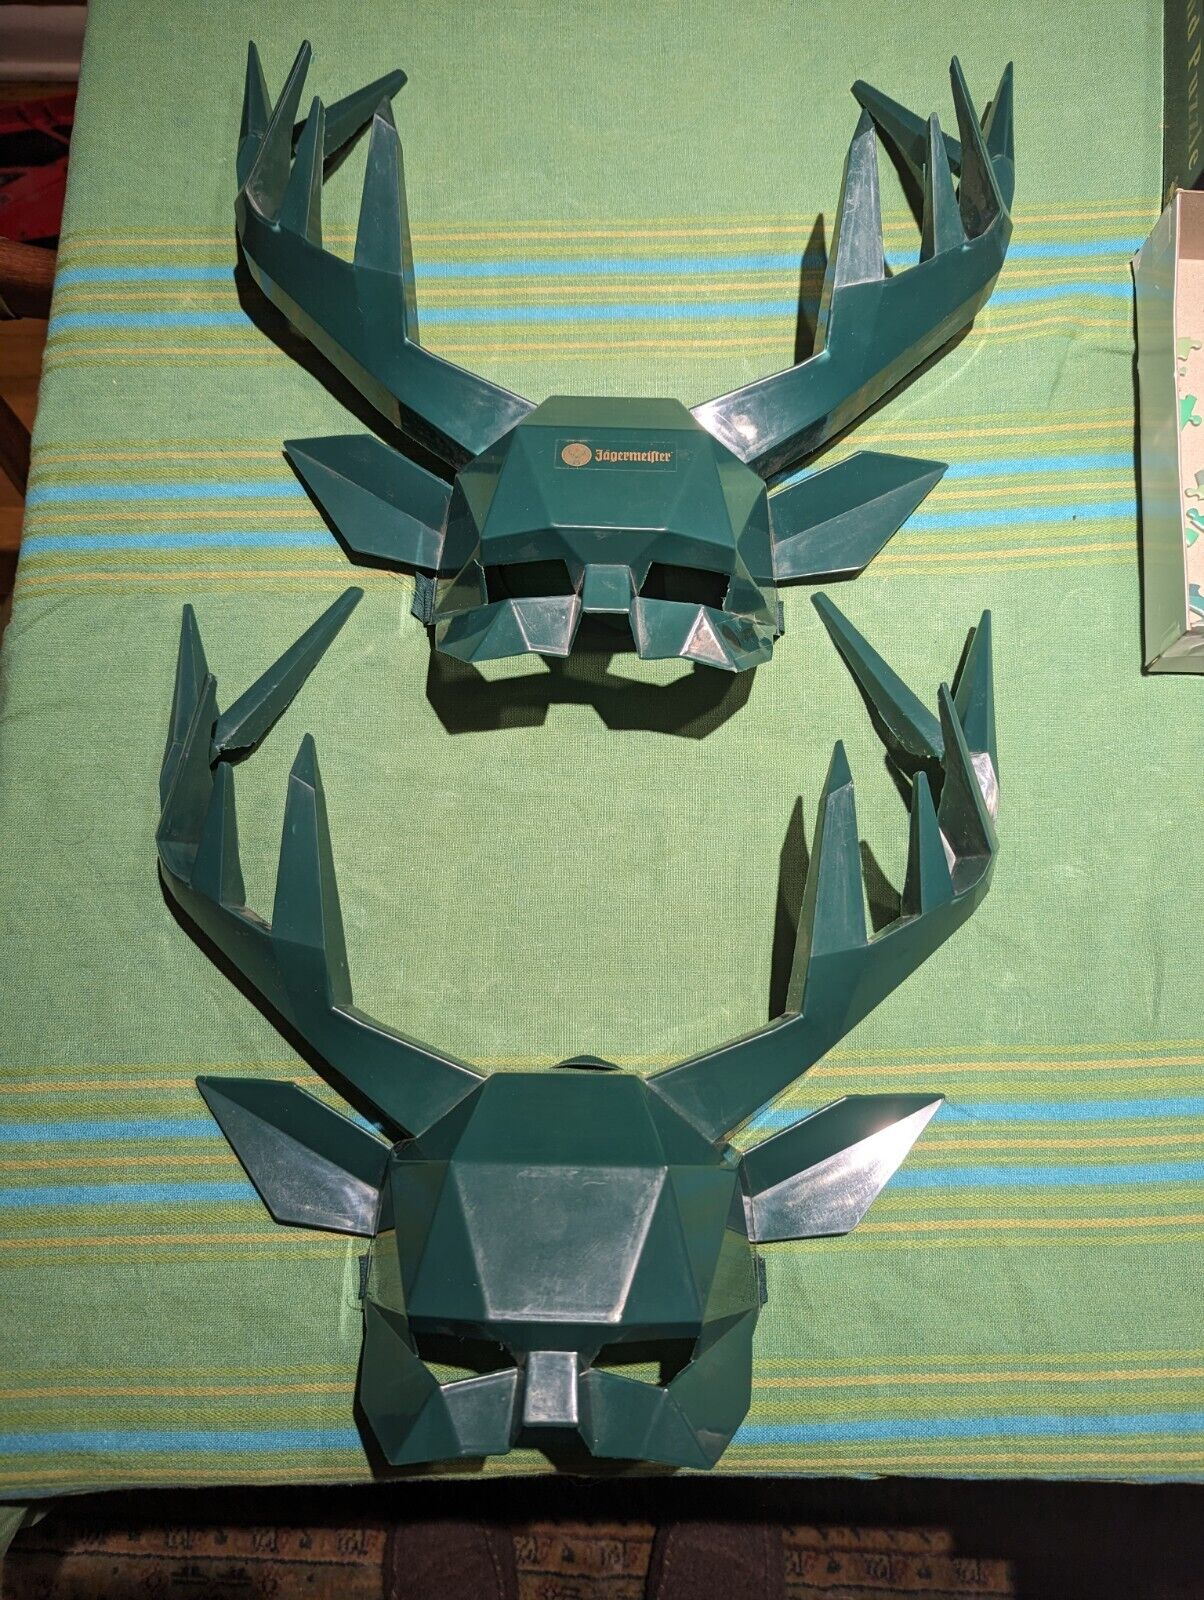 2 Jagermeister Green Antler Stag Masks with Elastic Straps Great for Halloween